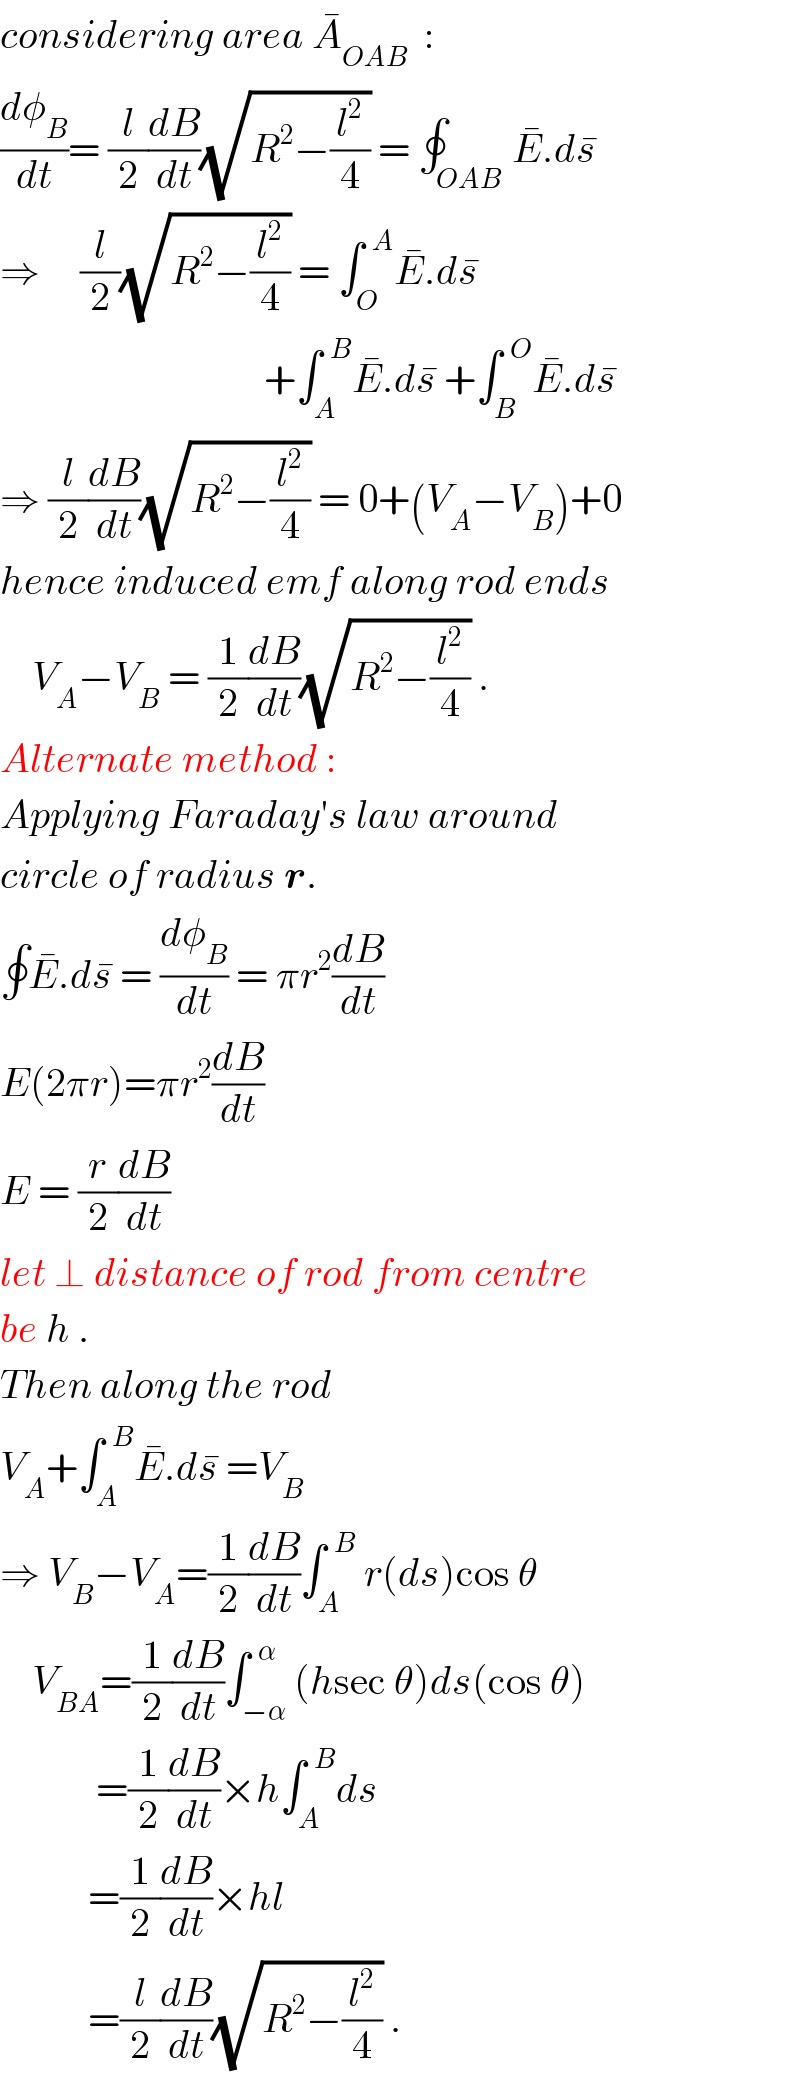 considering area A_(OAB) ^�   :  (dφ_B /dt)= (l/2)(dB/dt)(√(R^2 −(l^2 /4))) = ∮_(OAB) E^� .ds^�   ⇒     (l/2)(√(R^2 −(l^2 /4))) = ∫_O ^(  A) E^� .ds^�                                    +∫_A ^(  B) E^� .ds^�  +∫_B ^(  O) E^� .ds^�   ⇒ (l/2)(dB/dt)(√(R^2 −(l^2 /4))) = 0+(V_A −V_B )+0  hence induced emf along rod ends      V_A −V_B  = (1/2)(dB/dt)(√(R^2 −(l^2 /4))) .  Alternate method :  Applying Faraday′s law around  circle of radius r.  ∮E^� .ds^�  = (dφ_B /dt) = πr^2 (dB/dt)  E(2πr)=πr^2 (dB/dt)  E = (r/2)(dB/dt)  let ⊥ distance of rod from centre  be h .  Then along the rod  V_A +∫_A ^(  B) E^� .ds^�  =V_B   ⇒ V_B −V_A =(1/2)(dB/dt)∫_A ^(  B)  r(ds)cos θ      V_(BA) =(1/2)(dB/dt)∫_(−α) ^(  α) (hsec θ)ds(cos θ)              =(1/2)(dB/dt)×h∫_A ^(  B) ds             =(1/2)(dB/dt)×hl             =(l/2)(dB/dt)(√(R^2 −(l^2 /4))) .  